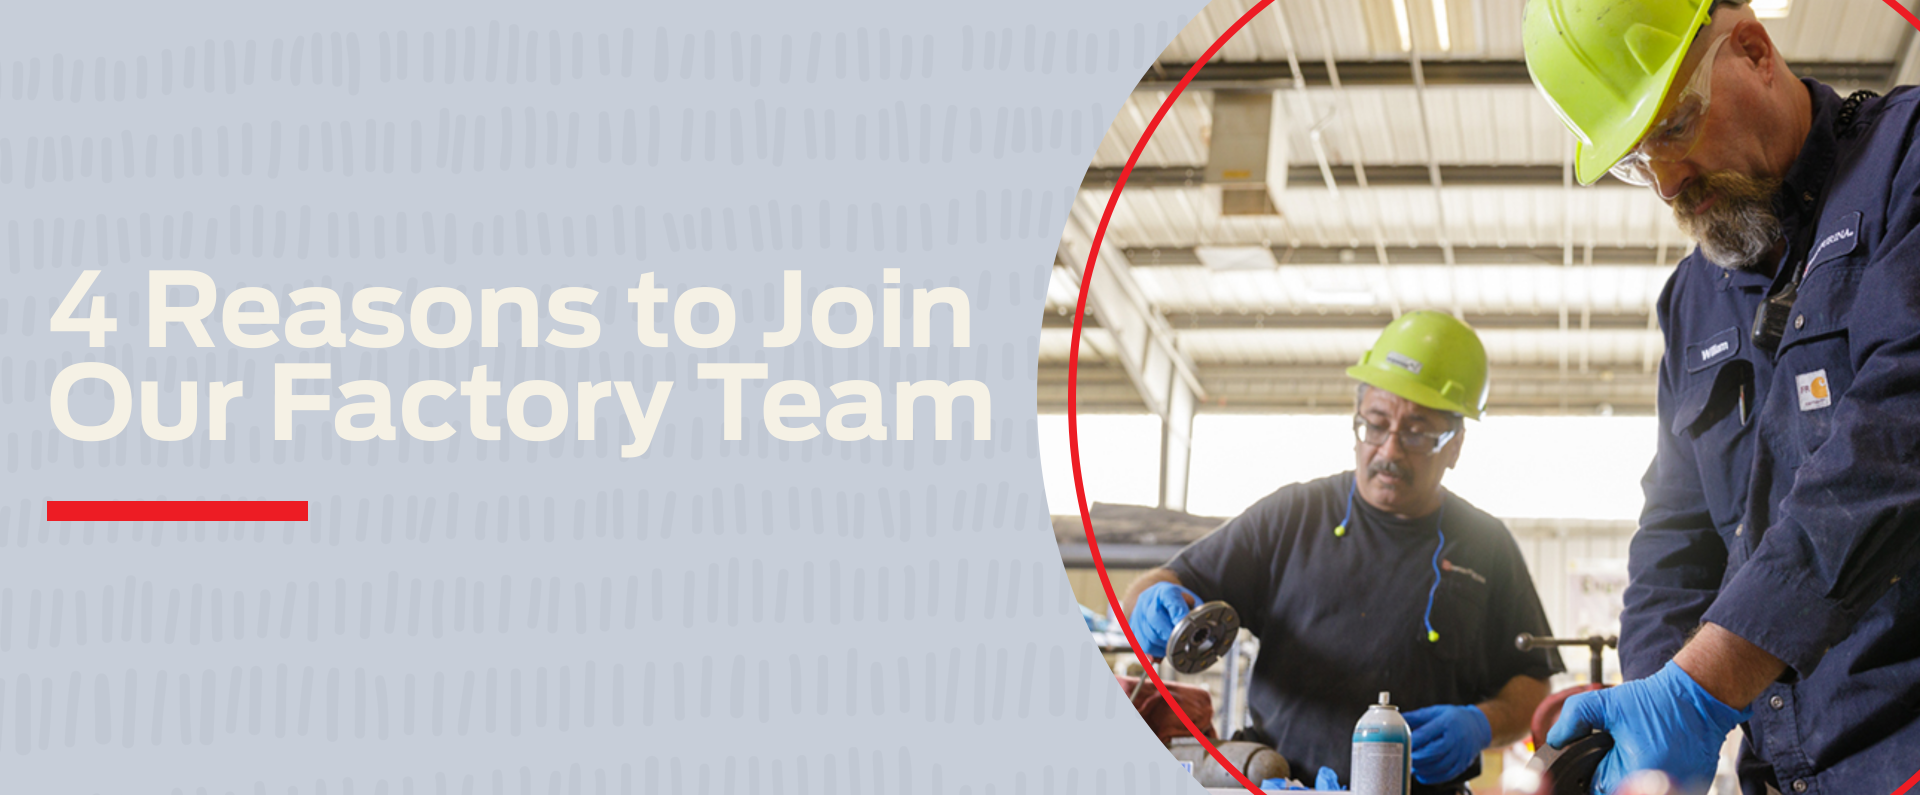 4 reasons to join our factory team